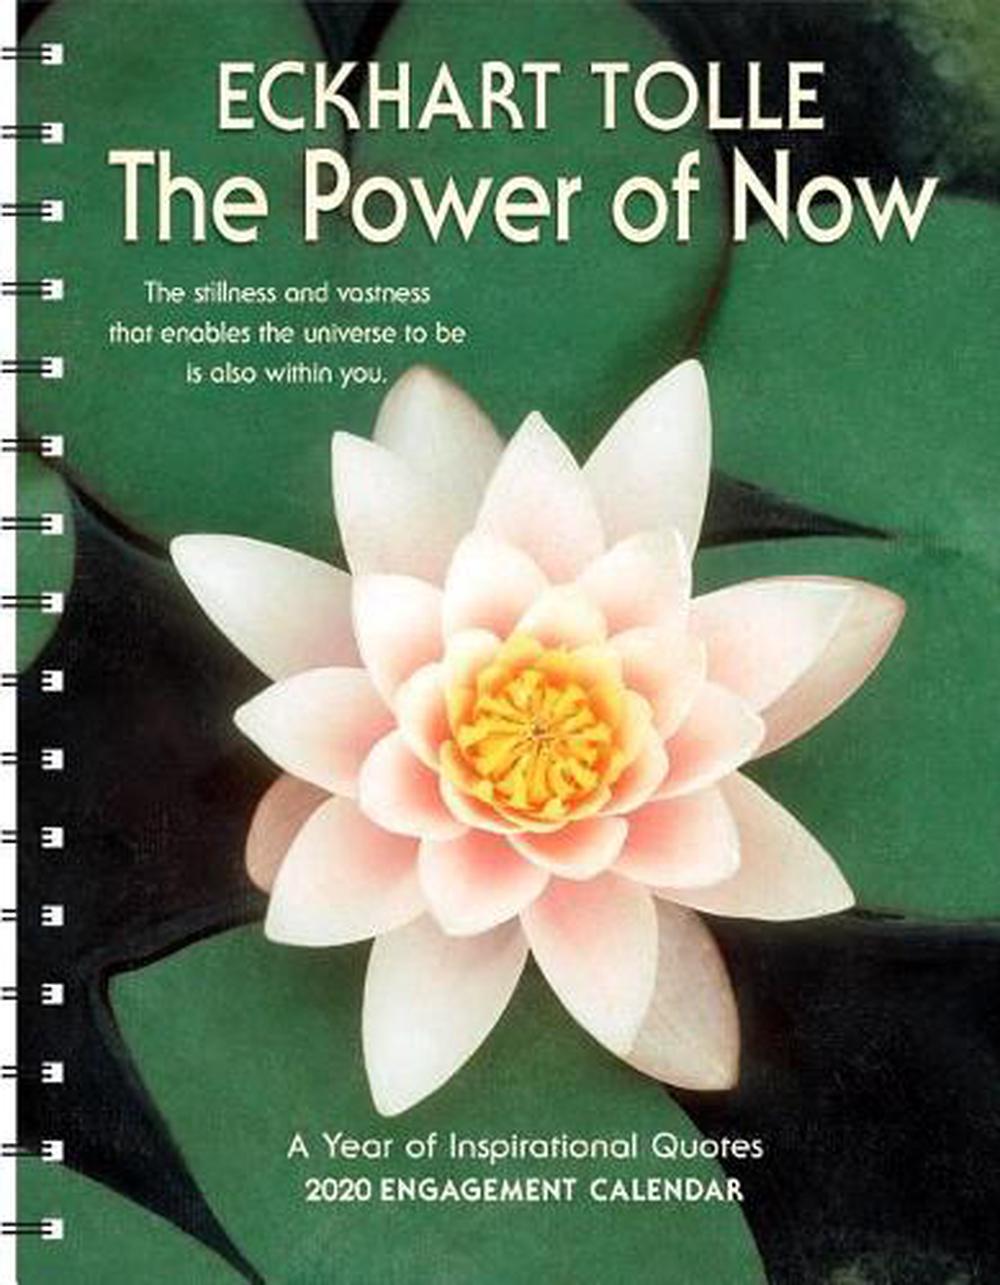 Power of Now 2020 Engagement Calendar: By Eckhart Tolle by Eckhart